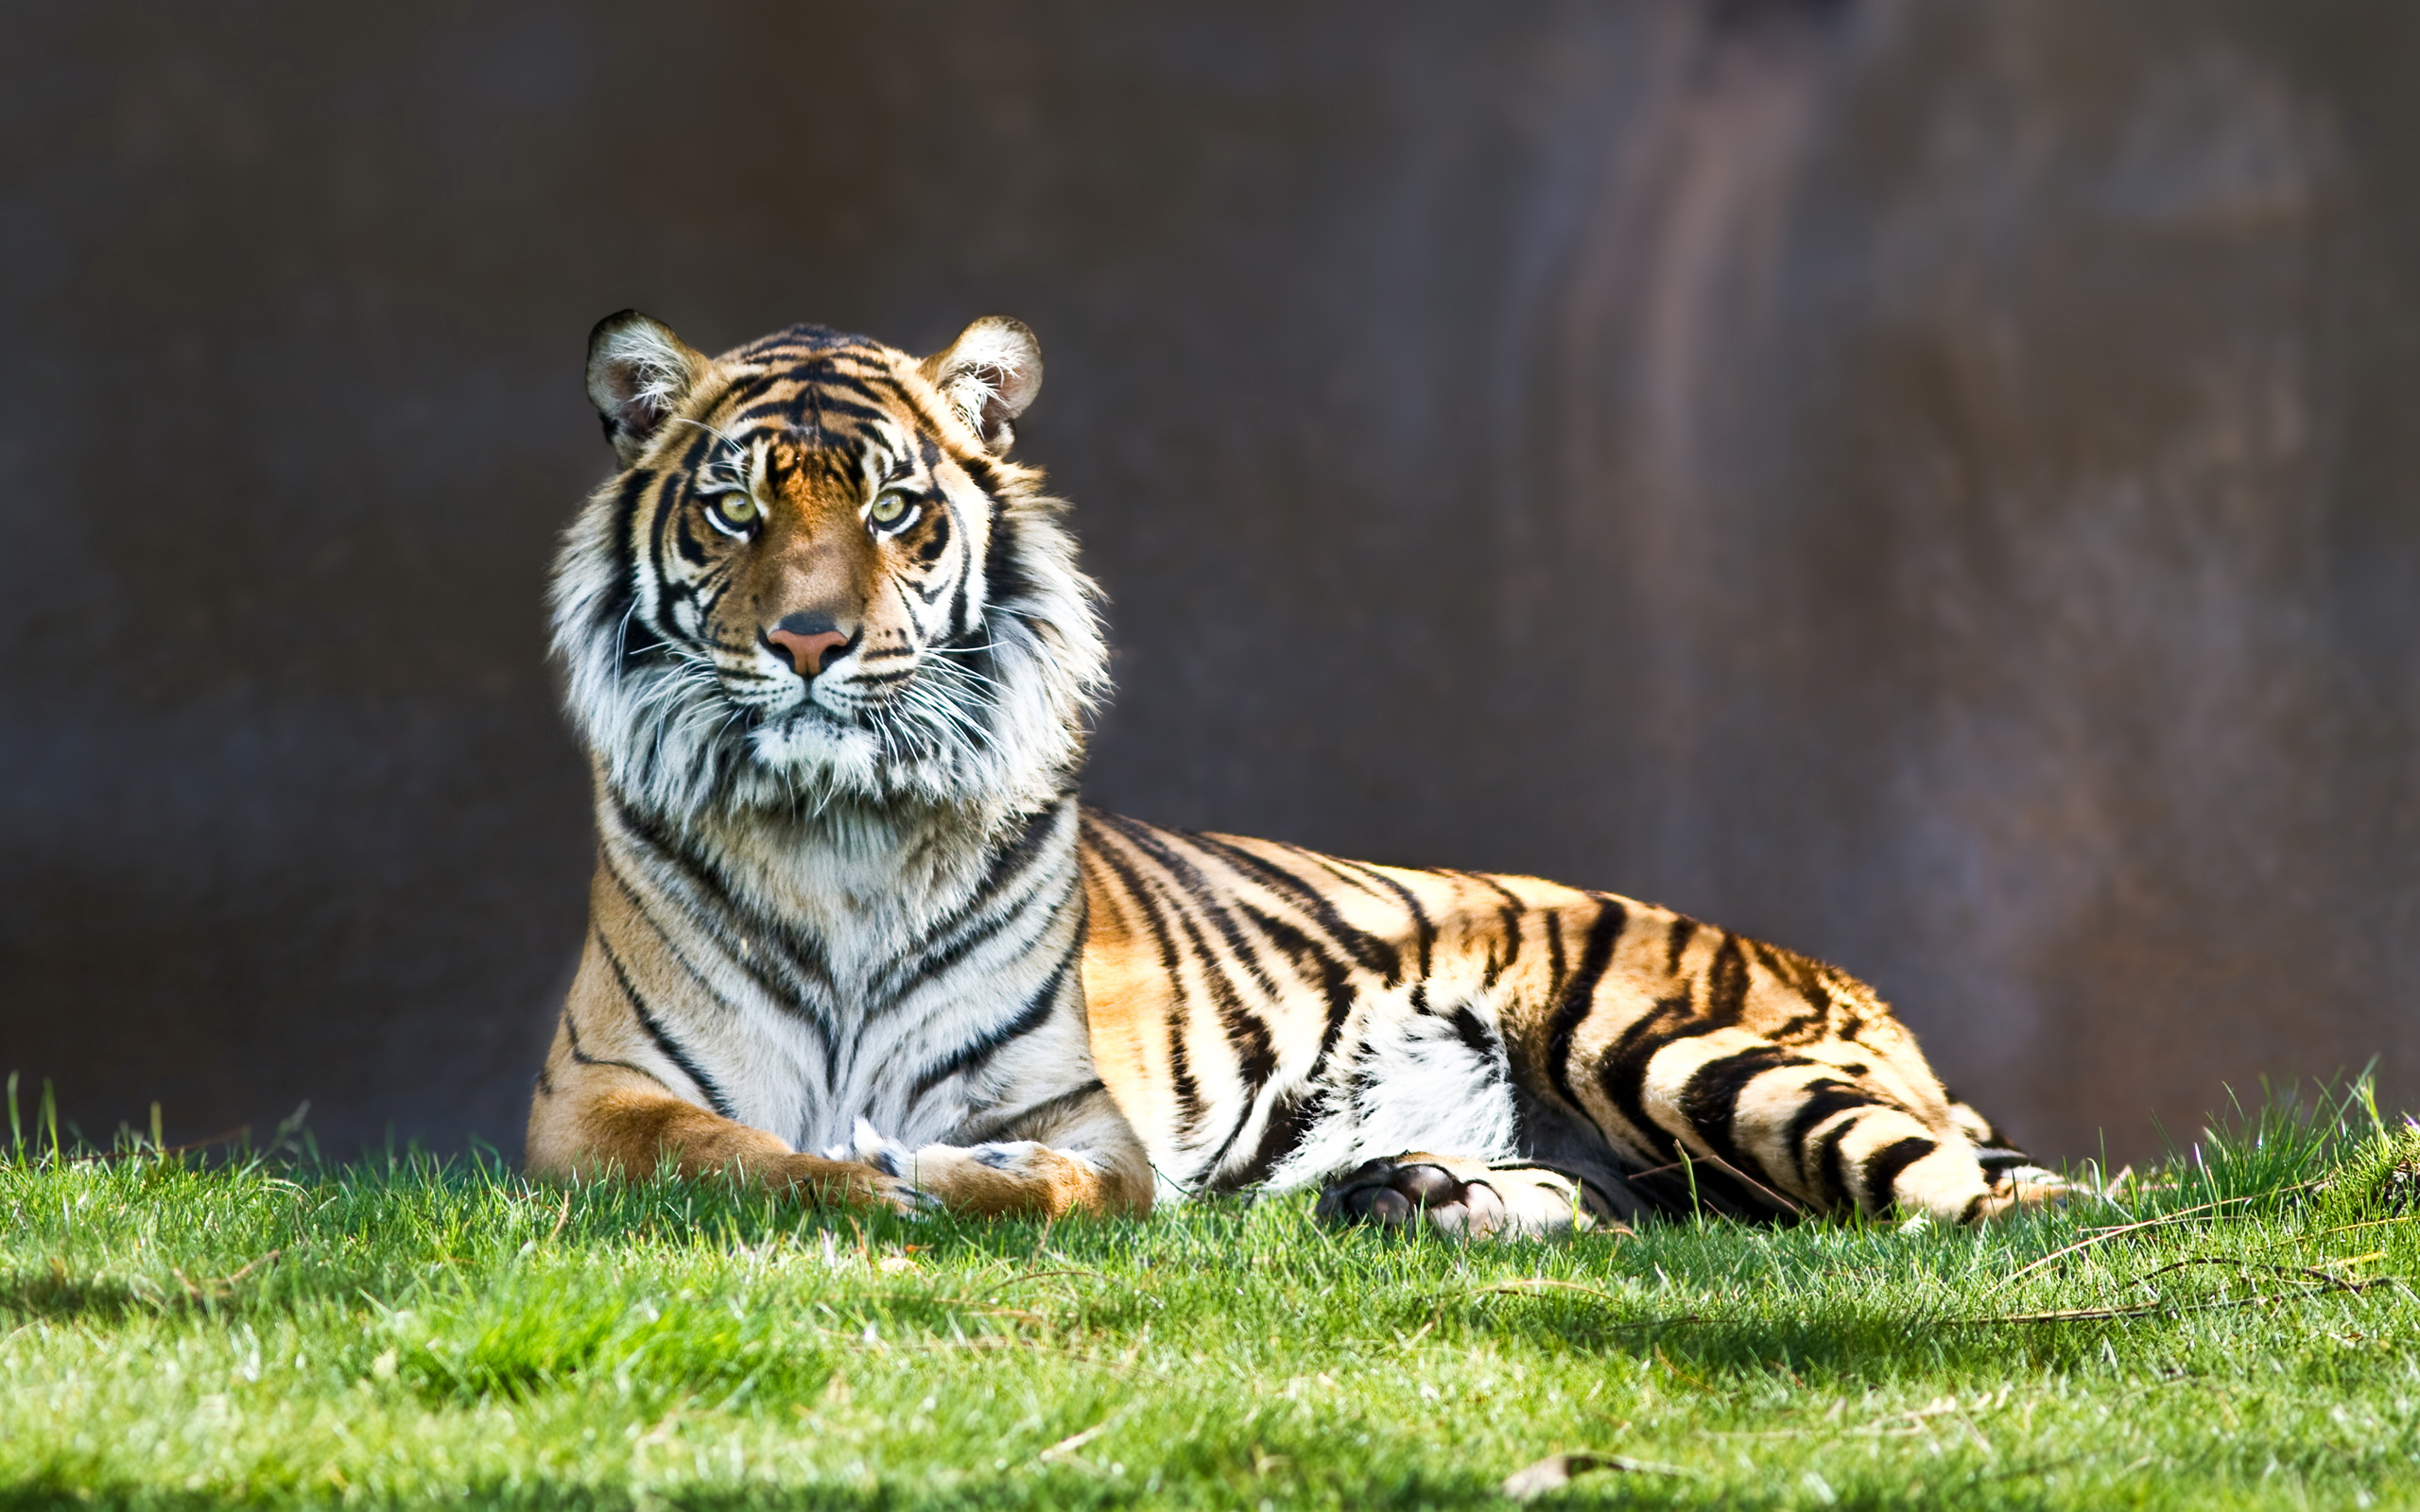 Tiger Staring - Wallpaper, High Definition, High Quality, Widescreen